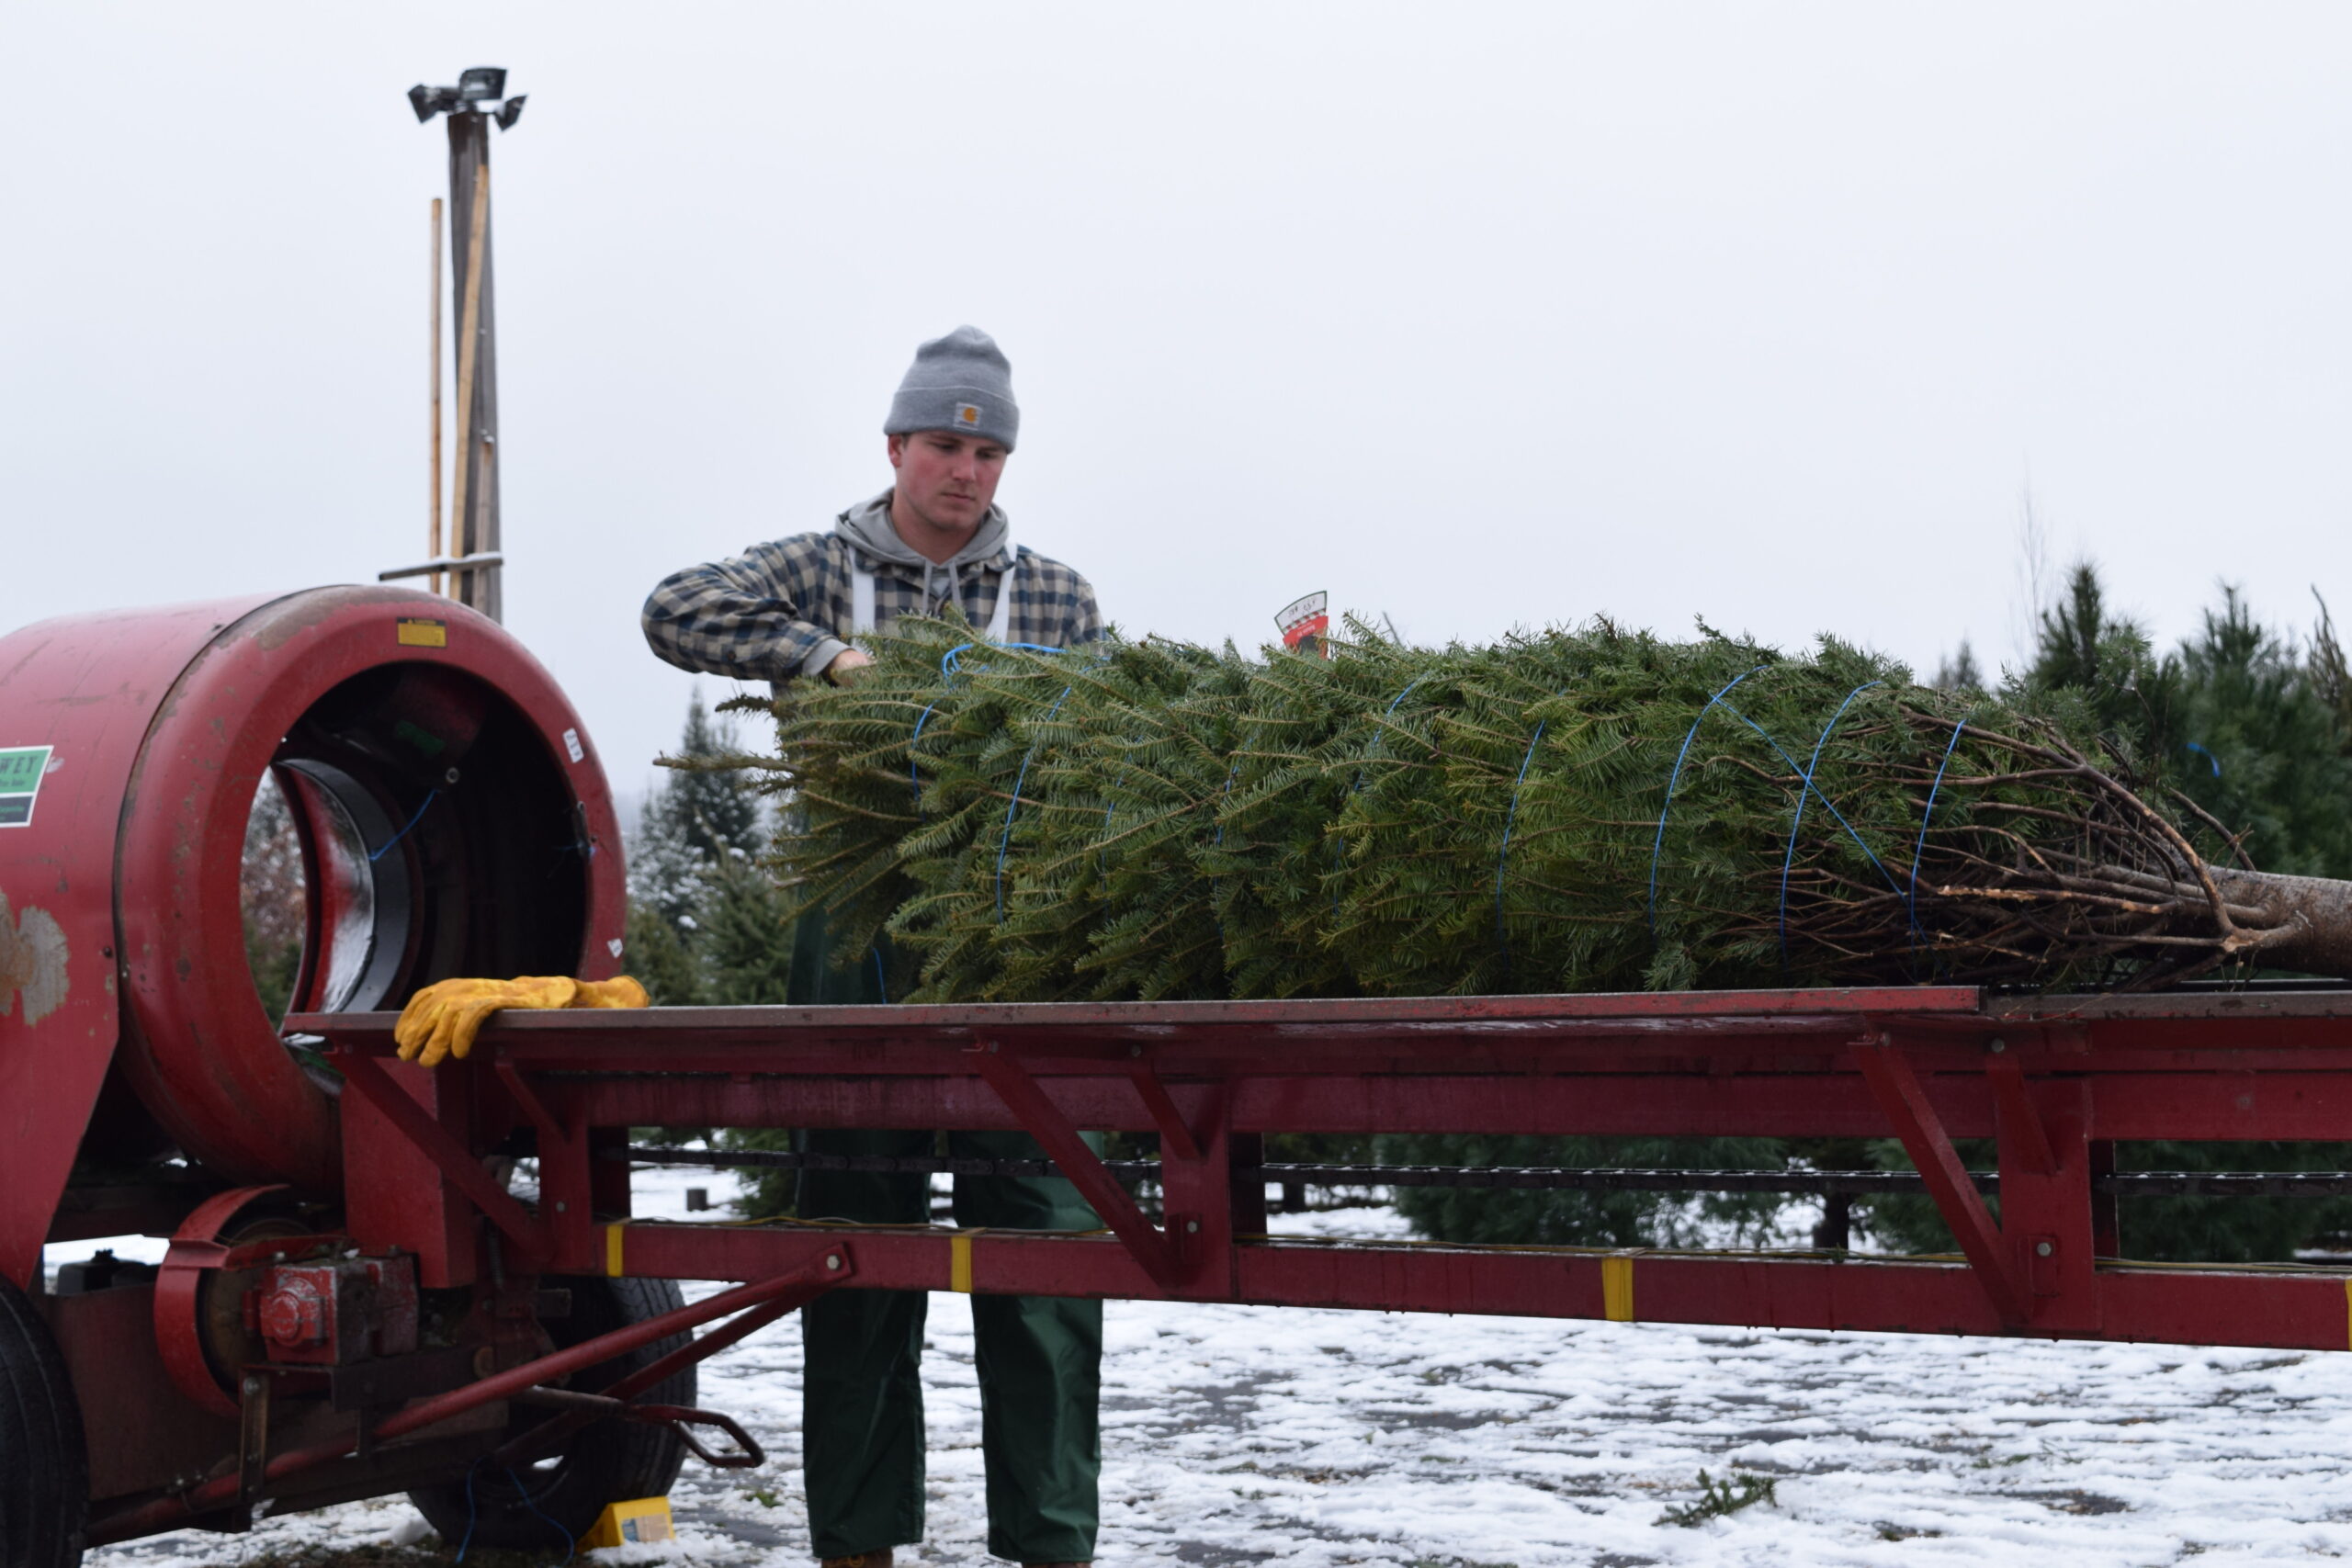 With higher prices, holiday travel, Wisconsin Christmas tree growers expect demand to slow this year